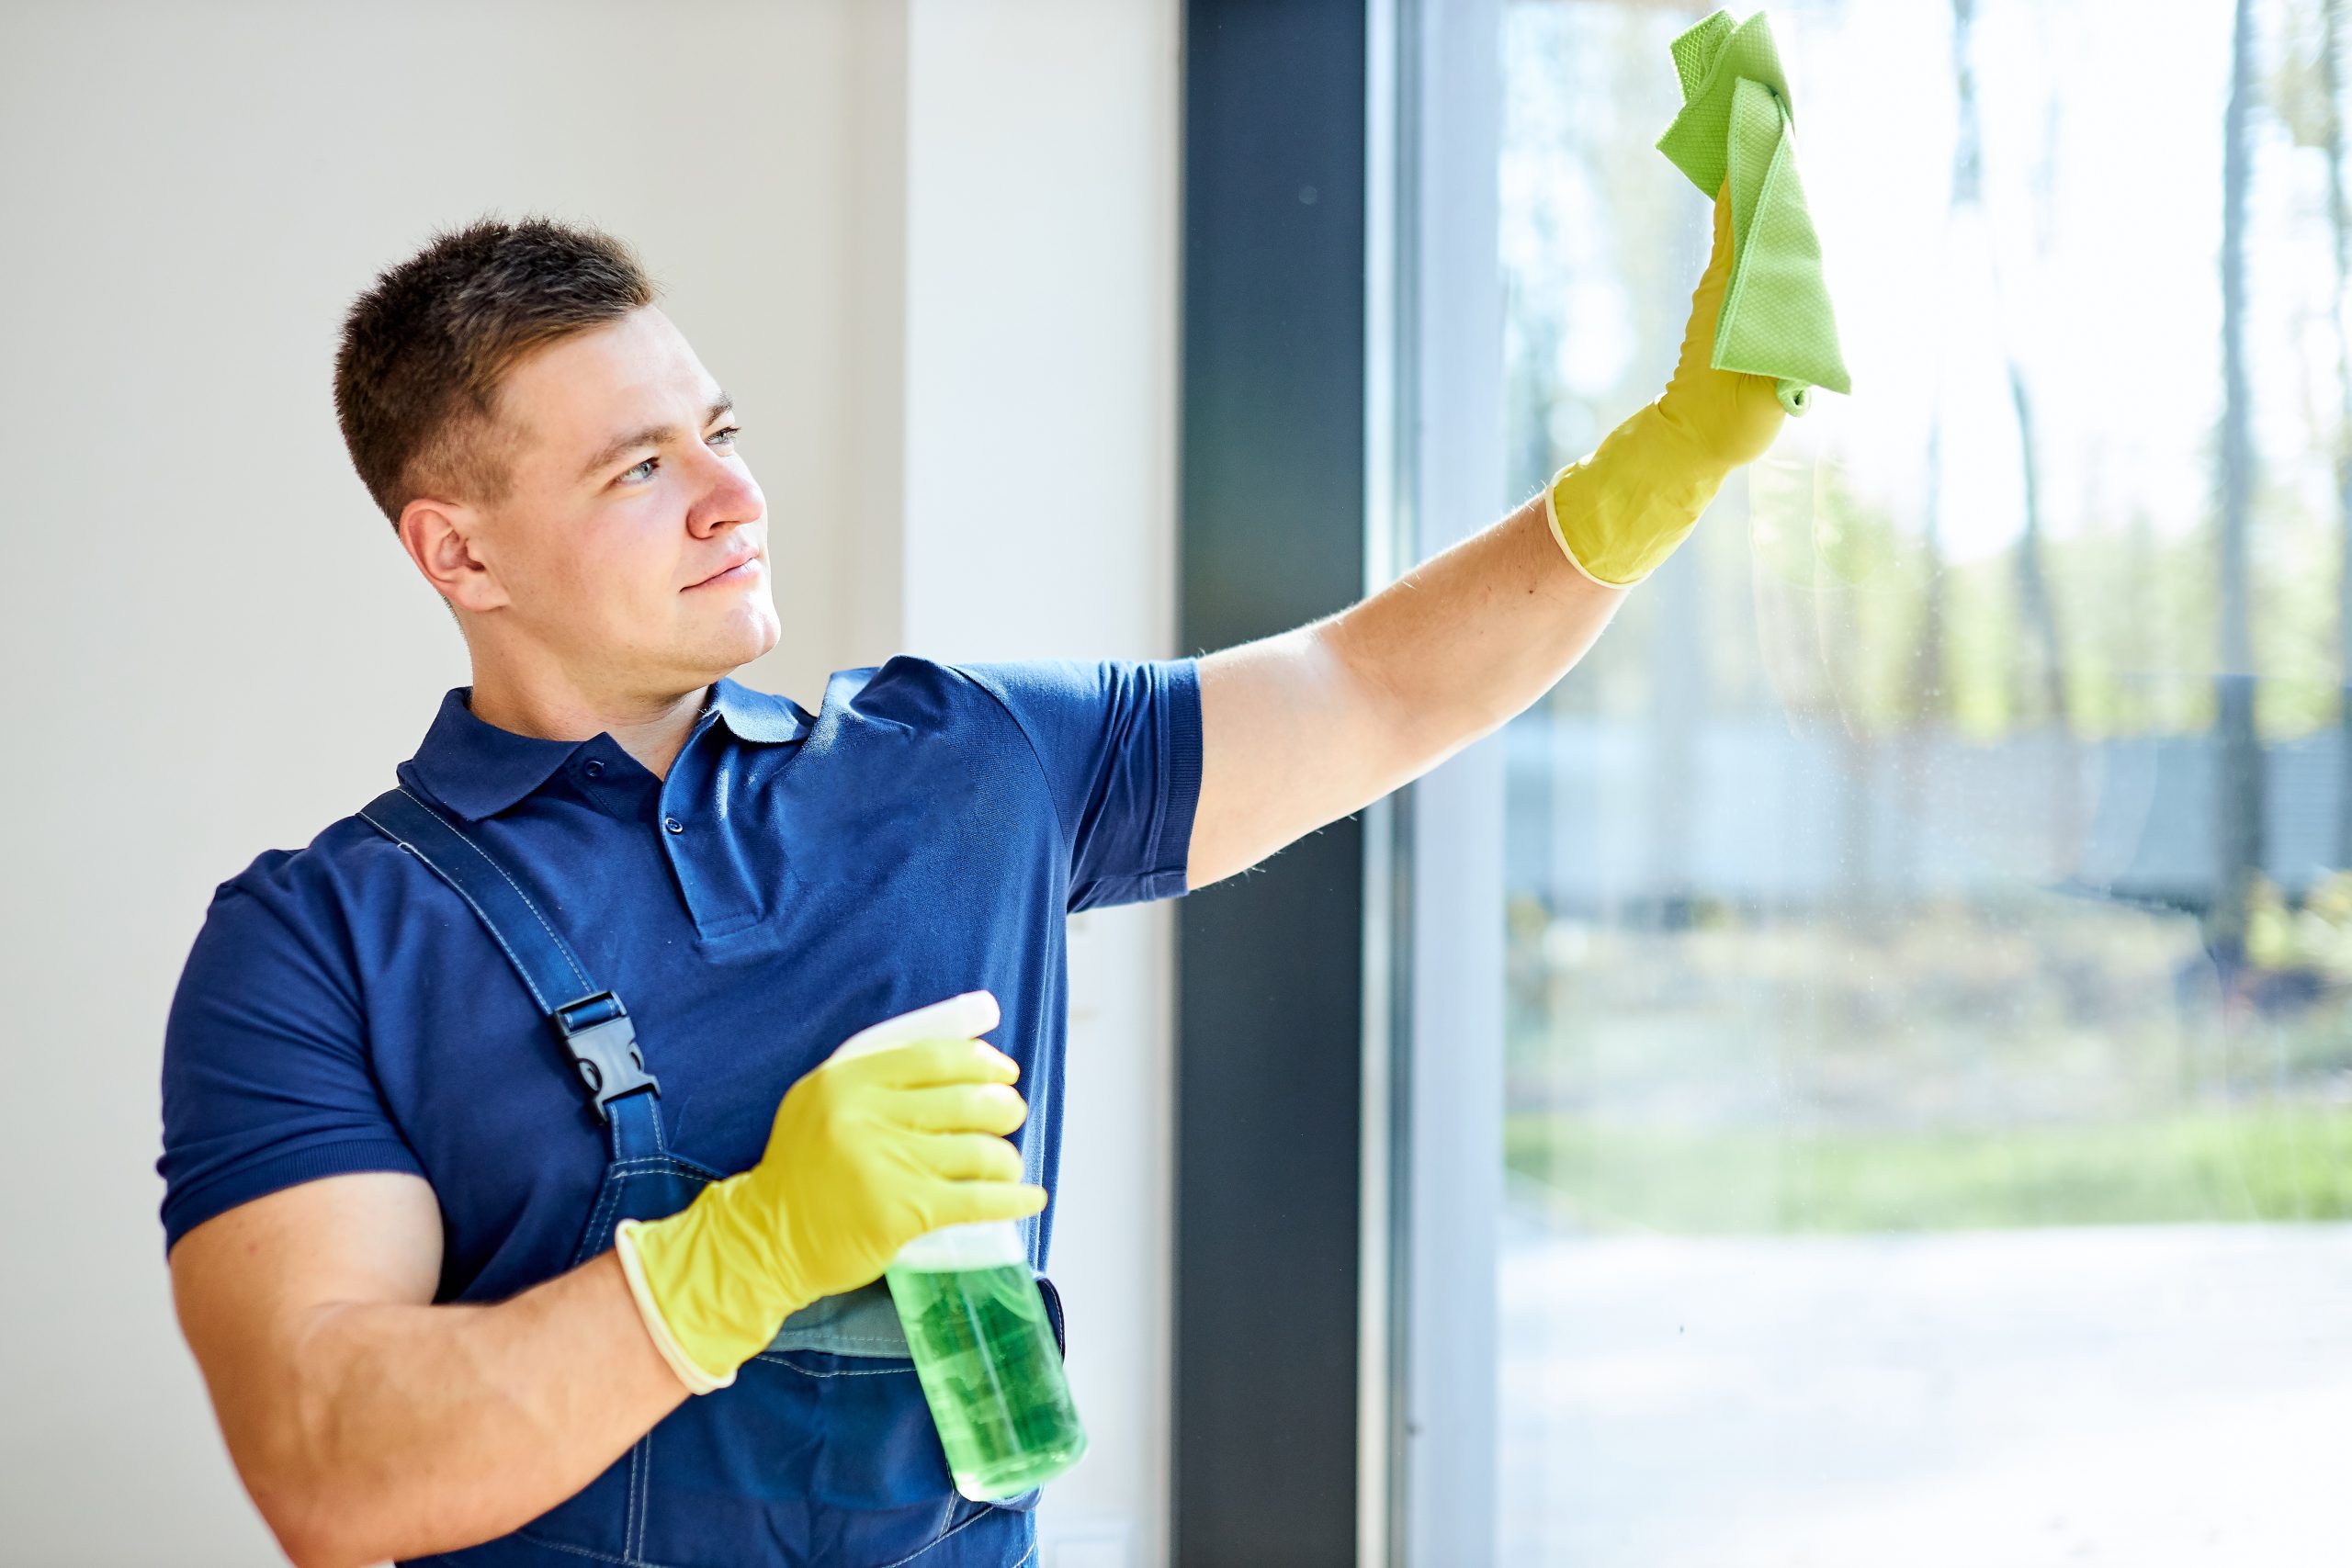 How do you know if your house needs a deep cleaning service?